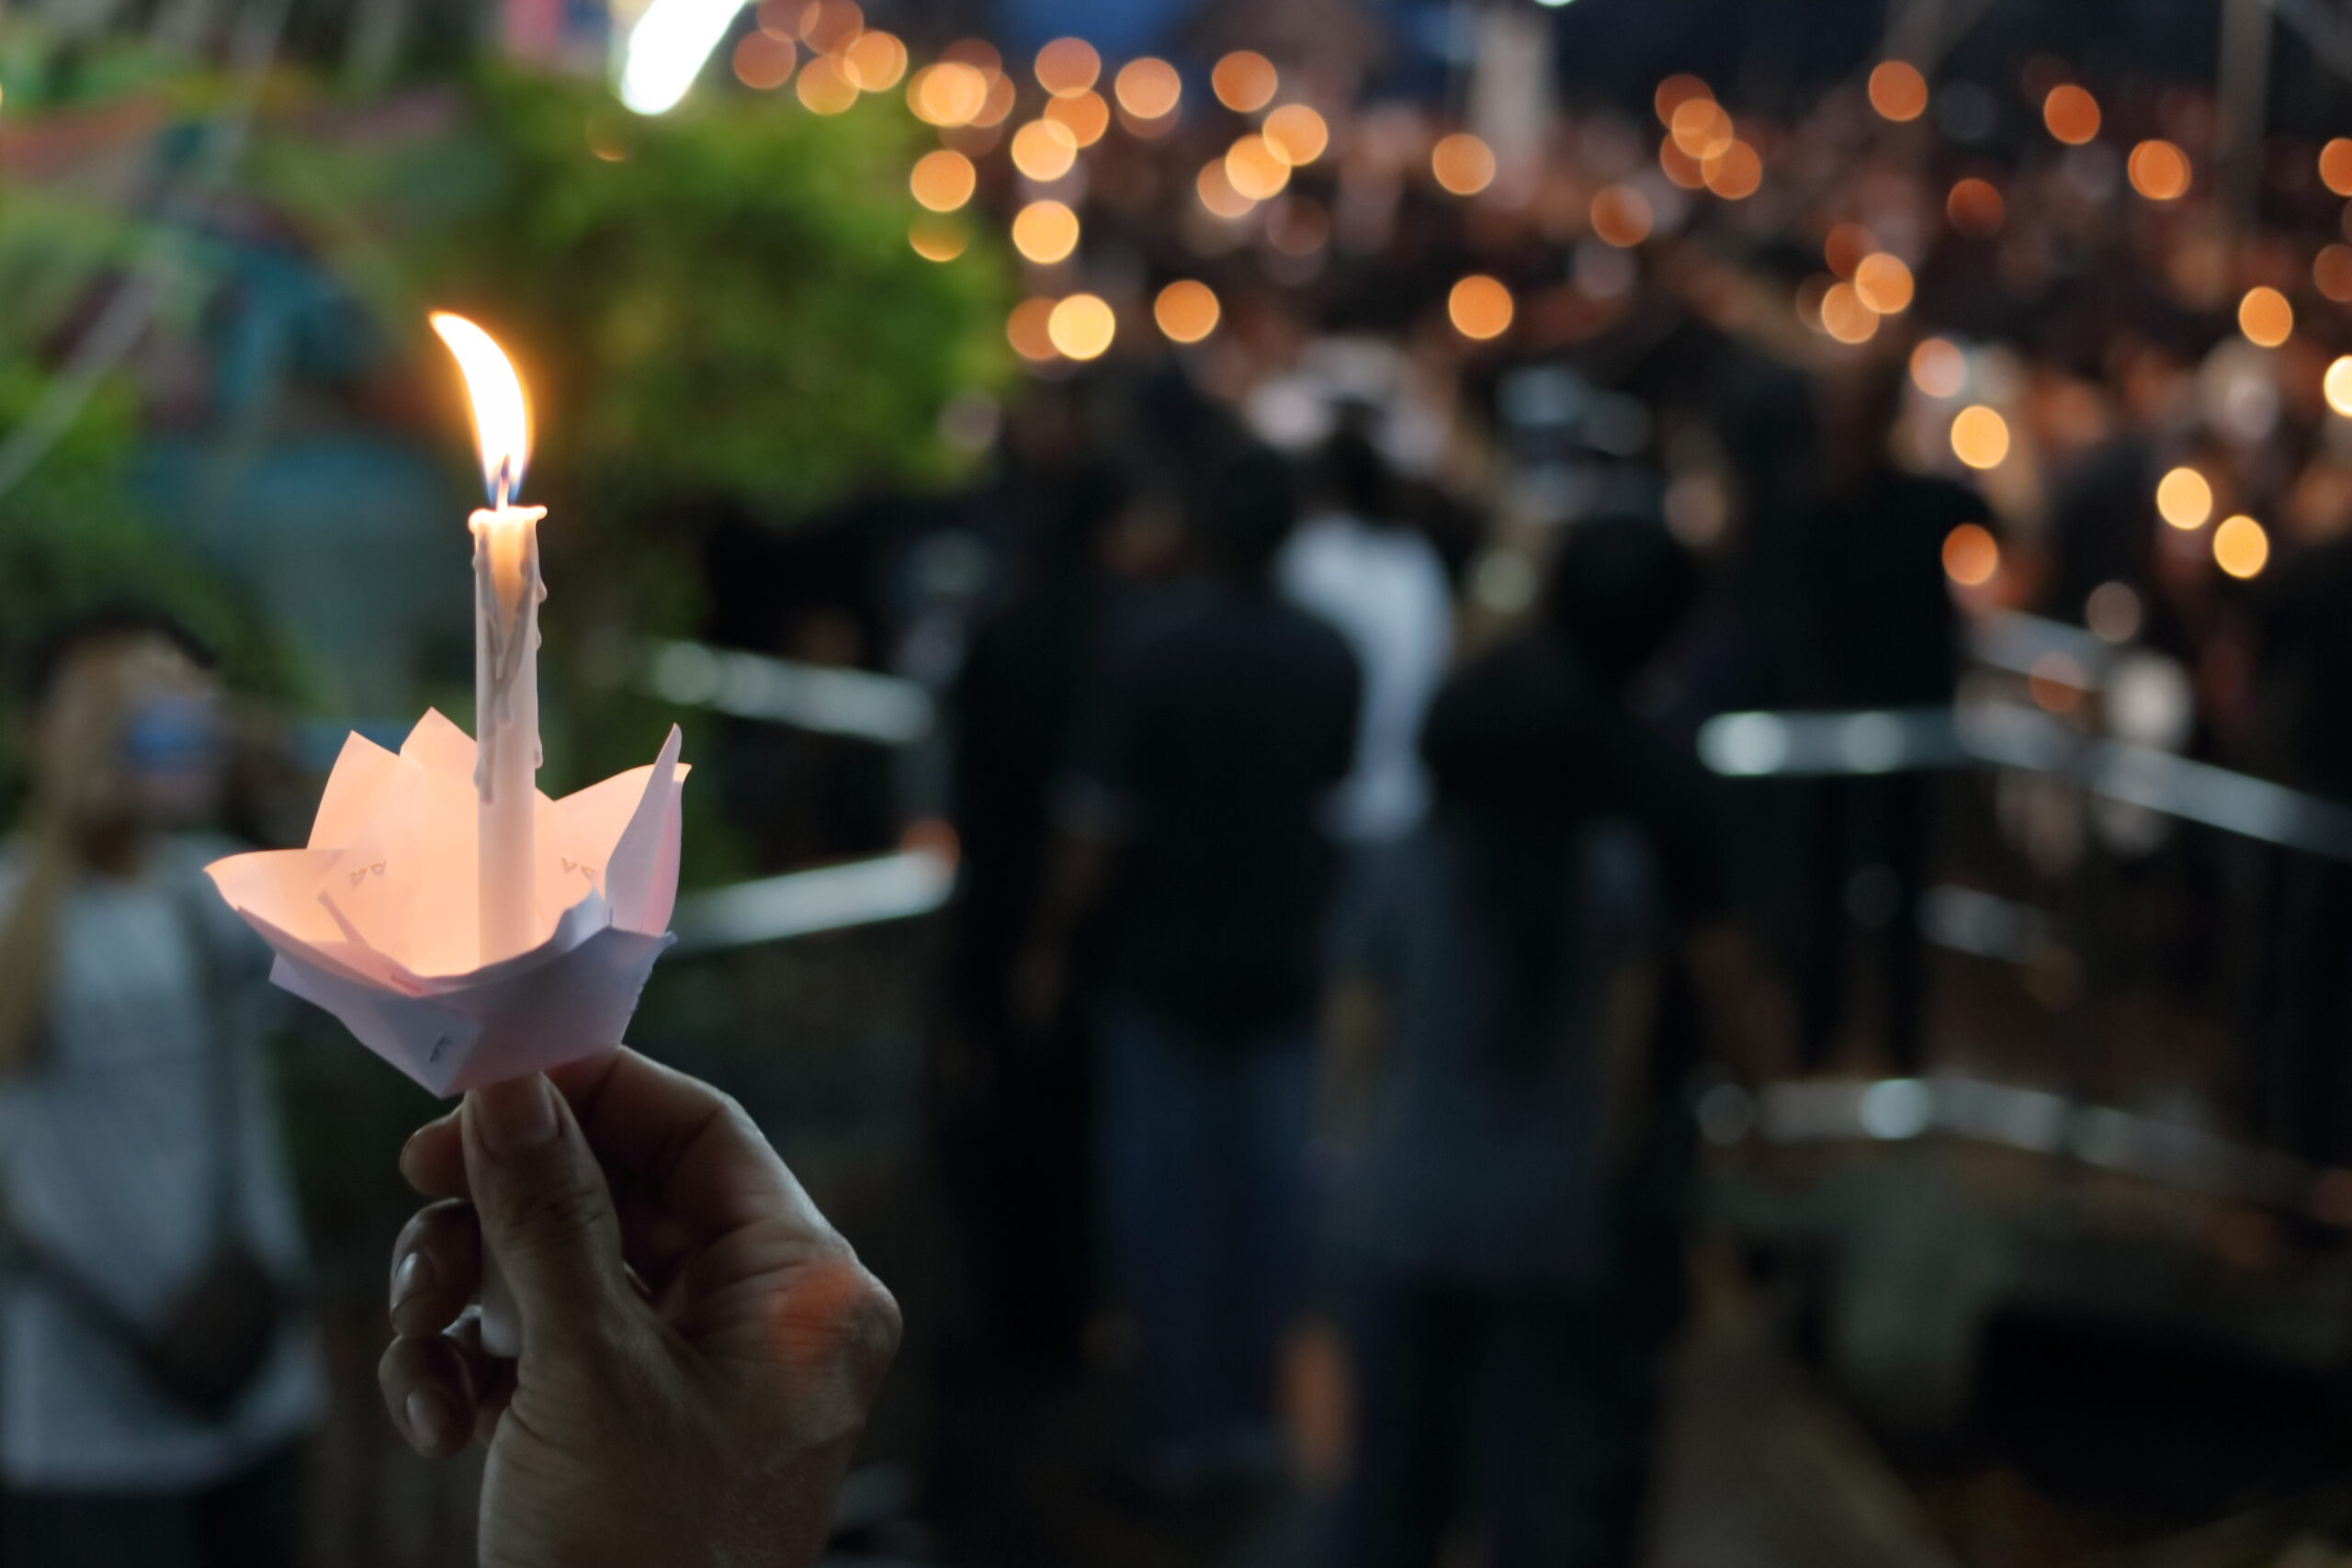 close up of hand holding candle - crowd in the background holding many candles